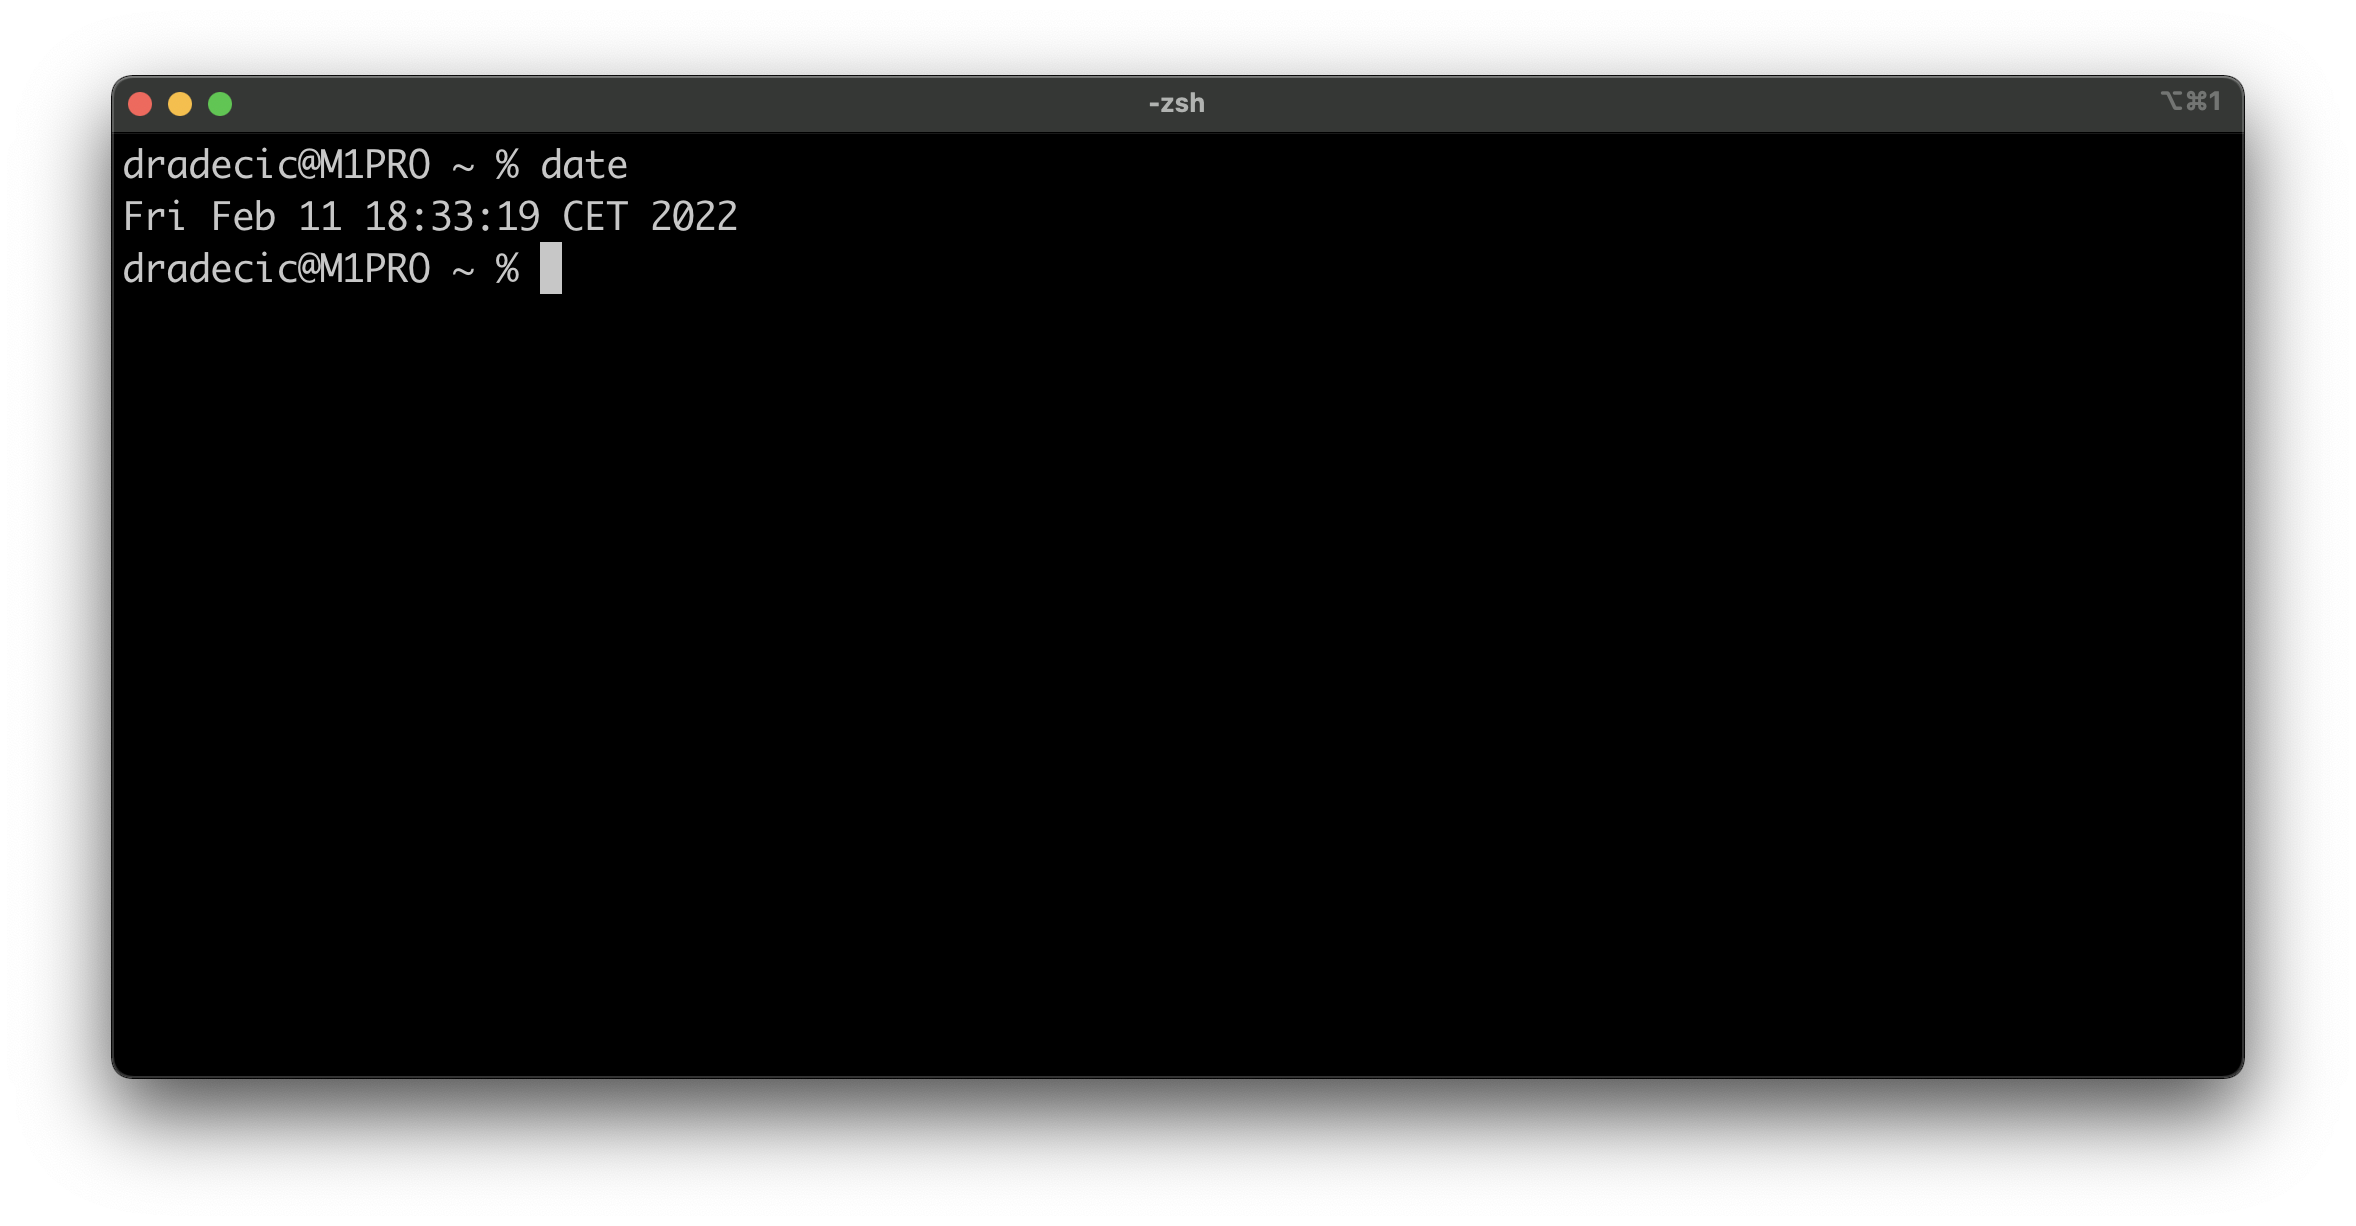 Image 1 - How to get the current datetime information through Terminal (image by author)